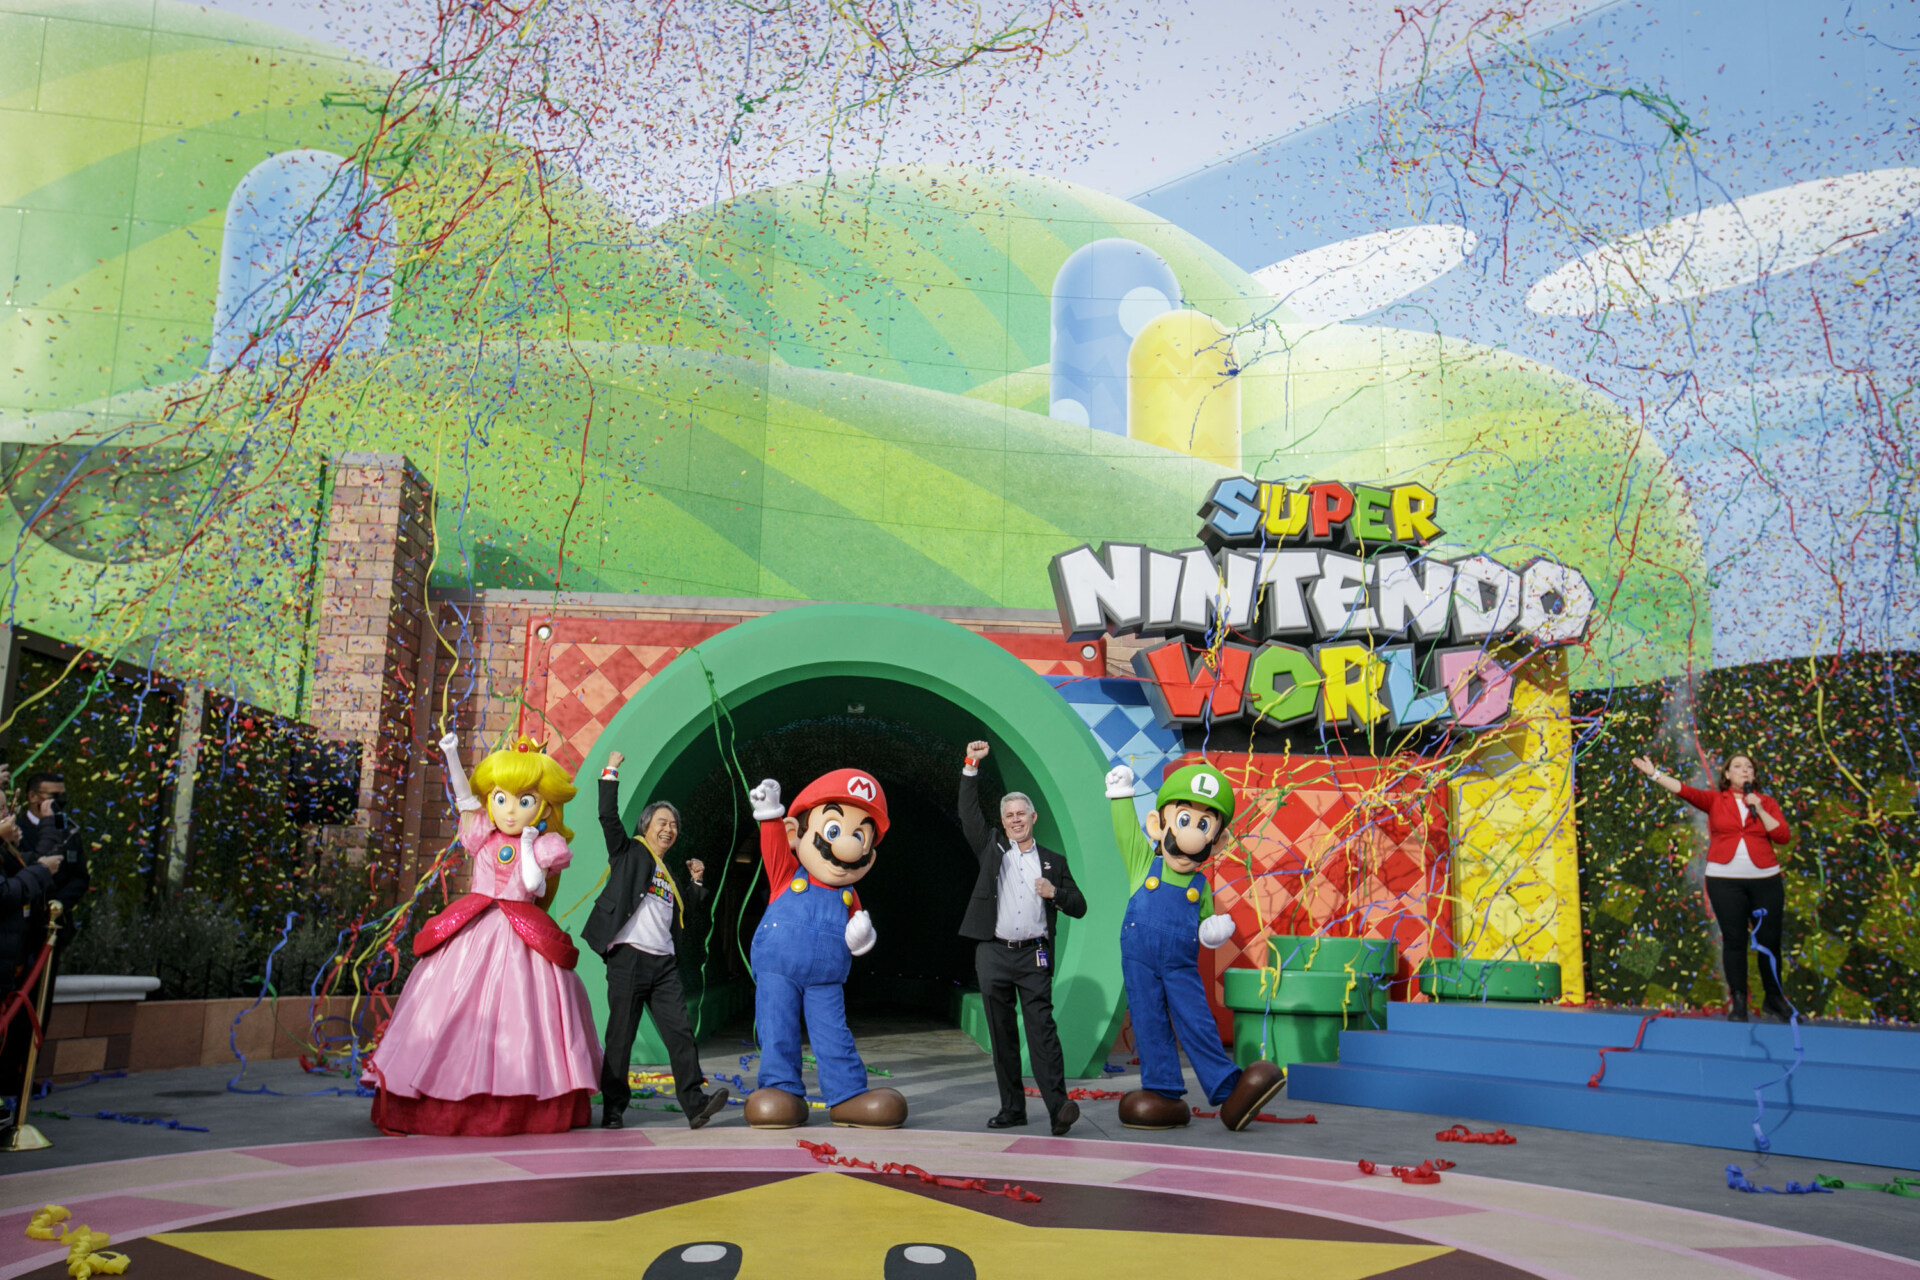 Super Nintendo World Officially Opens at Universal Studios Hollywood